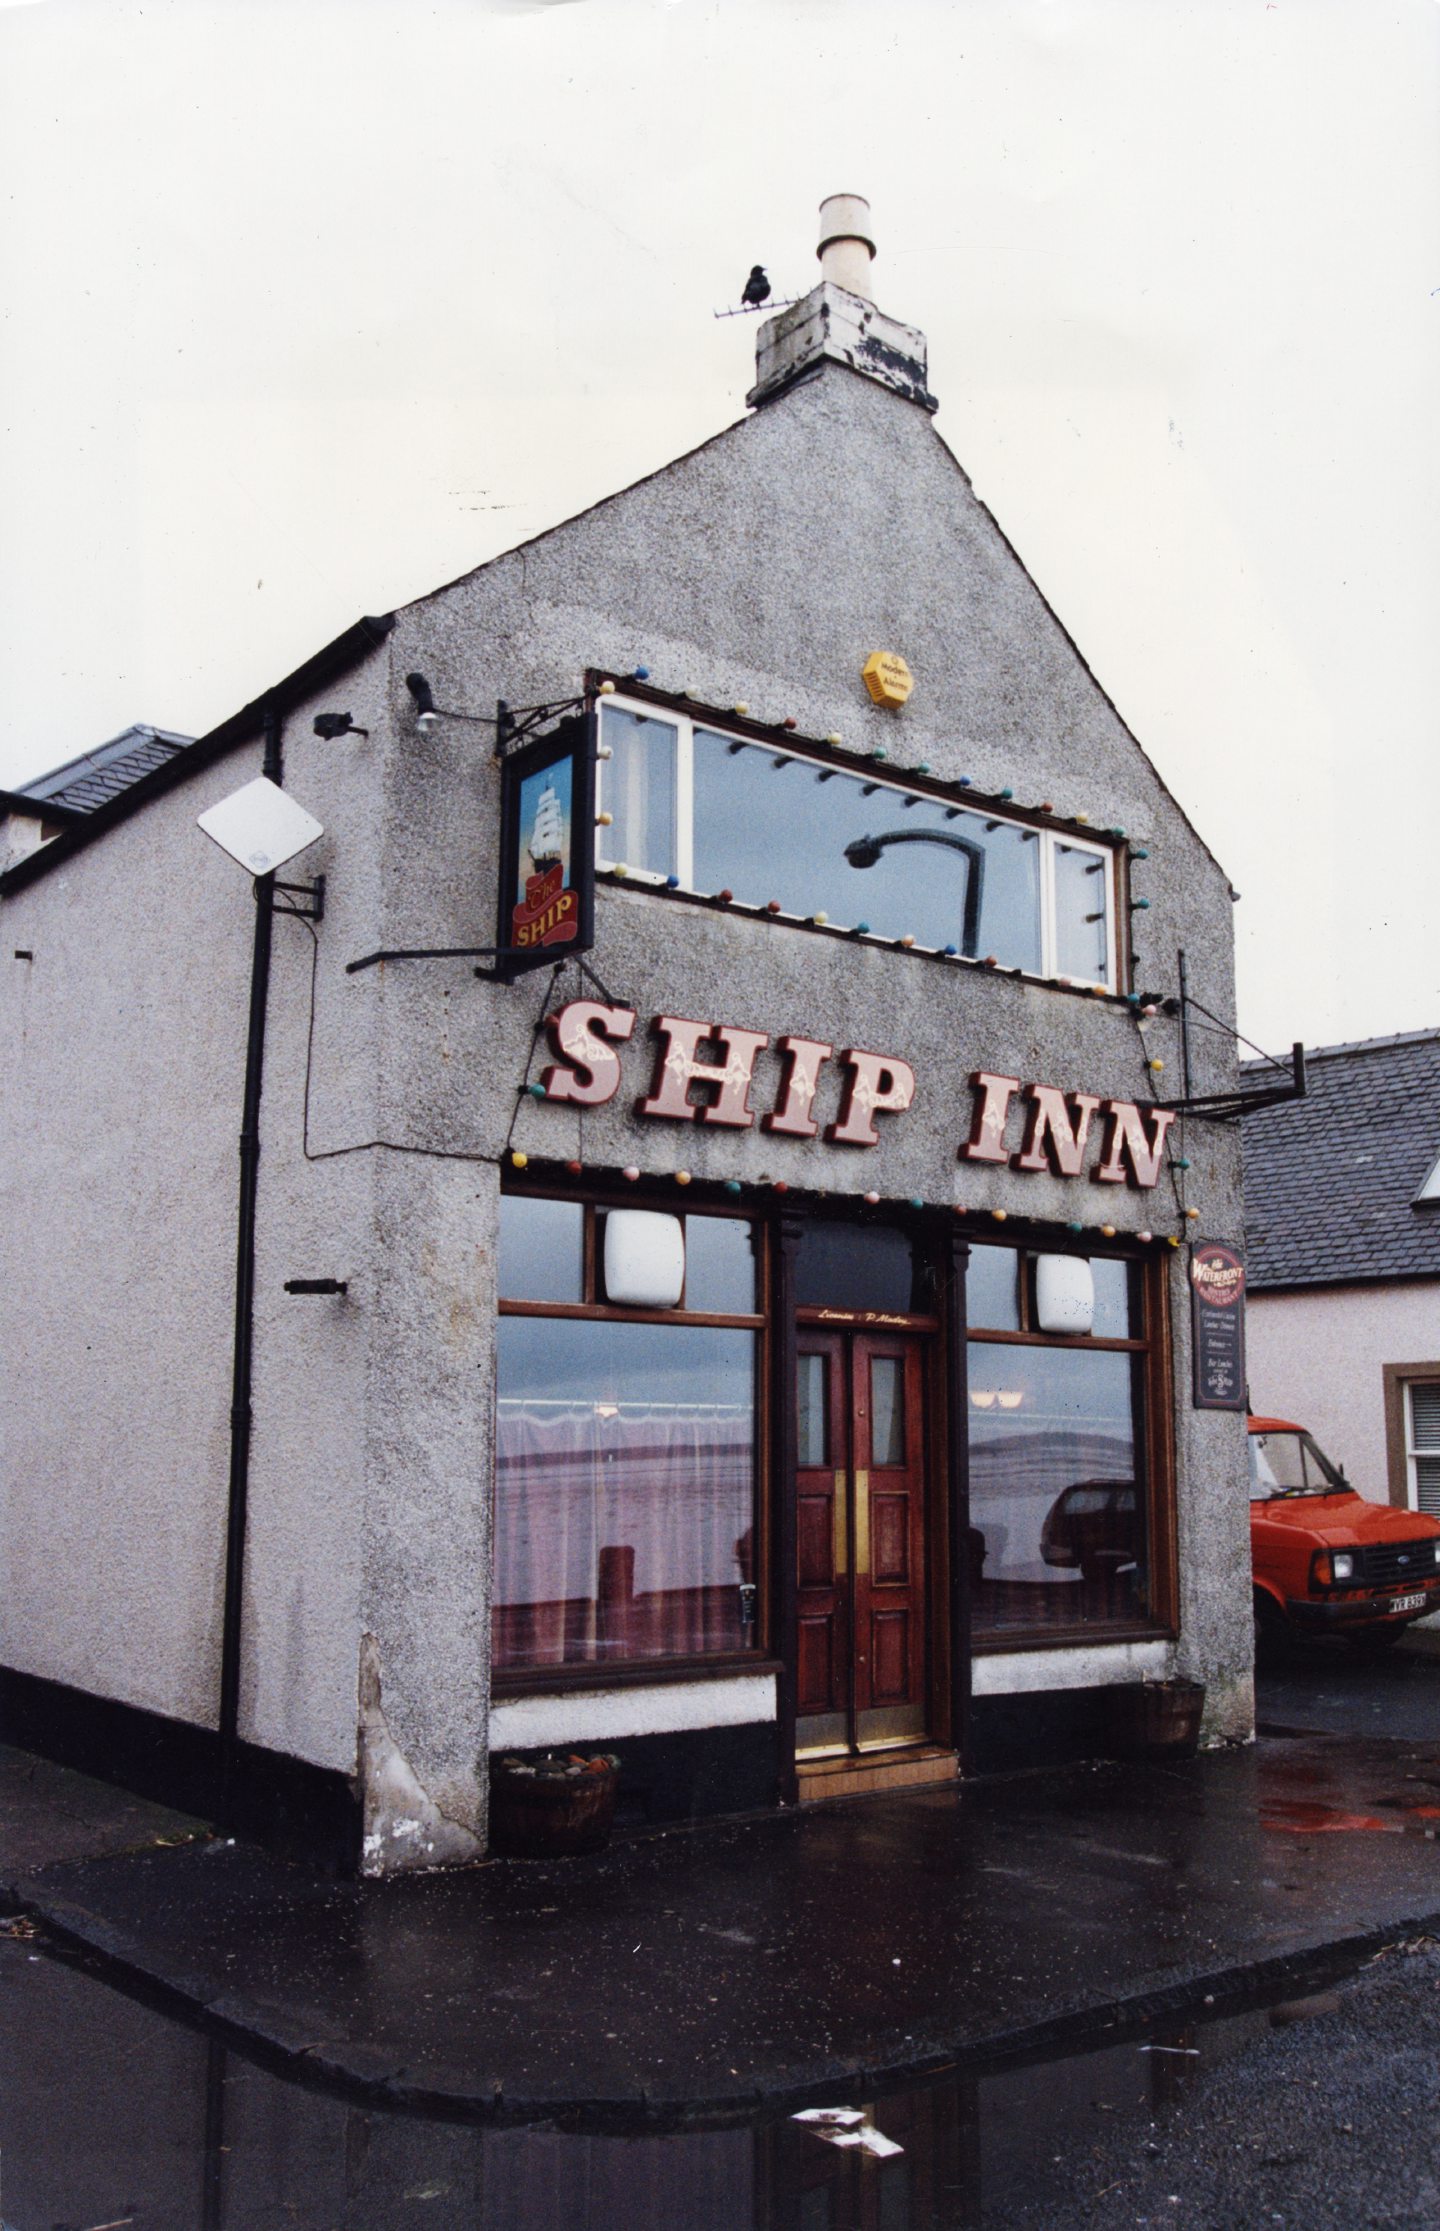 The outside of The Ship Inn, which was up for sale.